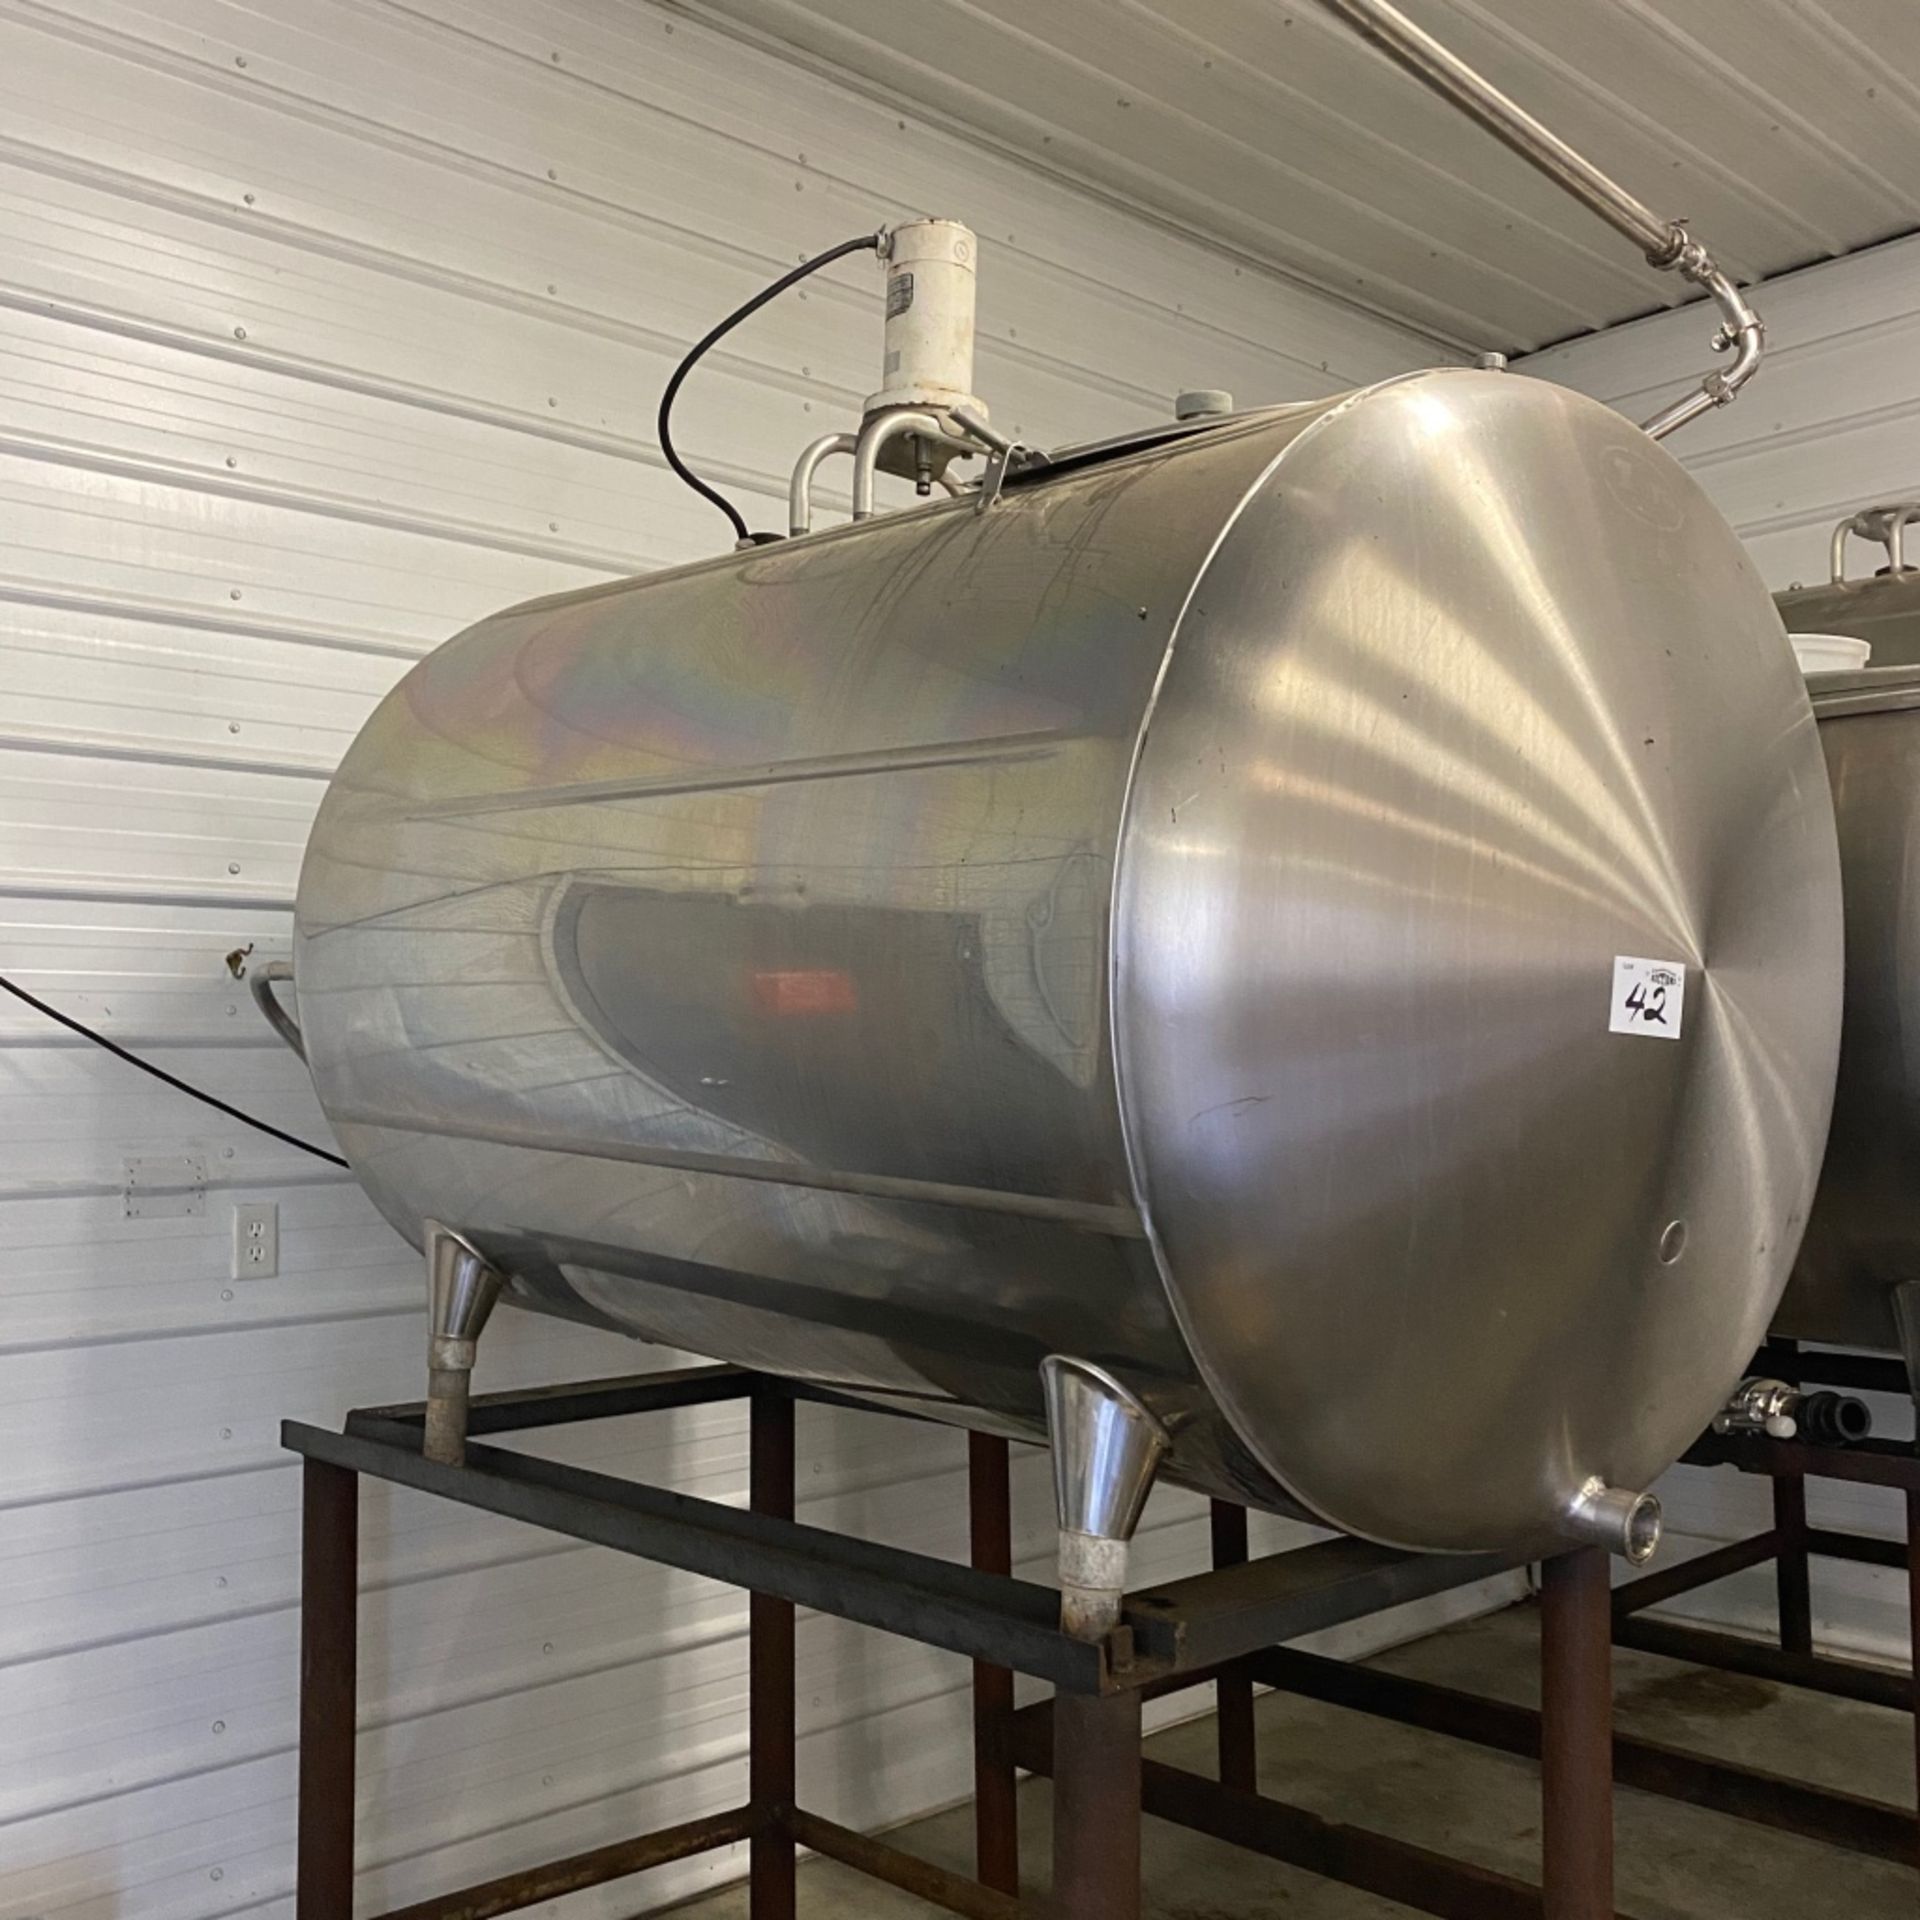 Stainless Steel Bulk Tank with Stand, 350 Gallons - Image 2 of 2